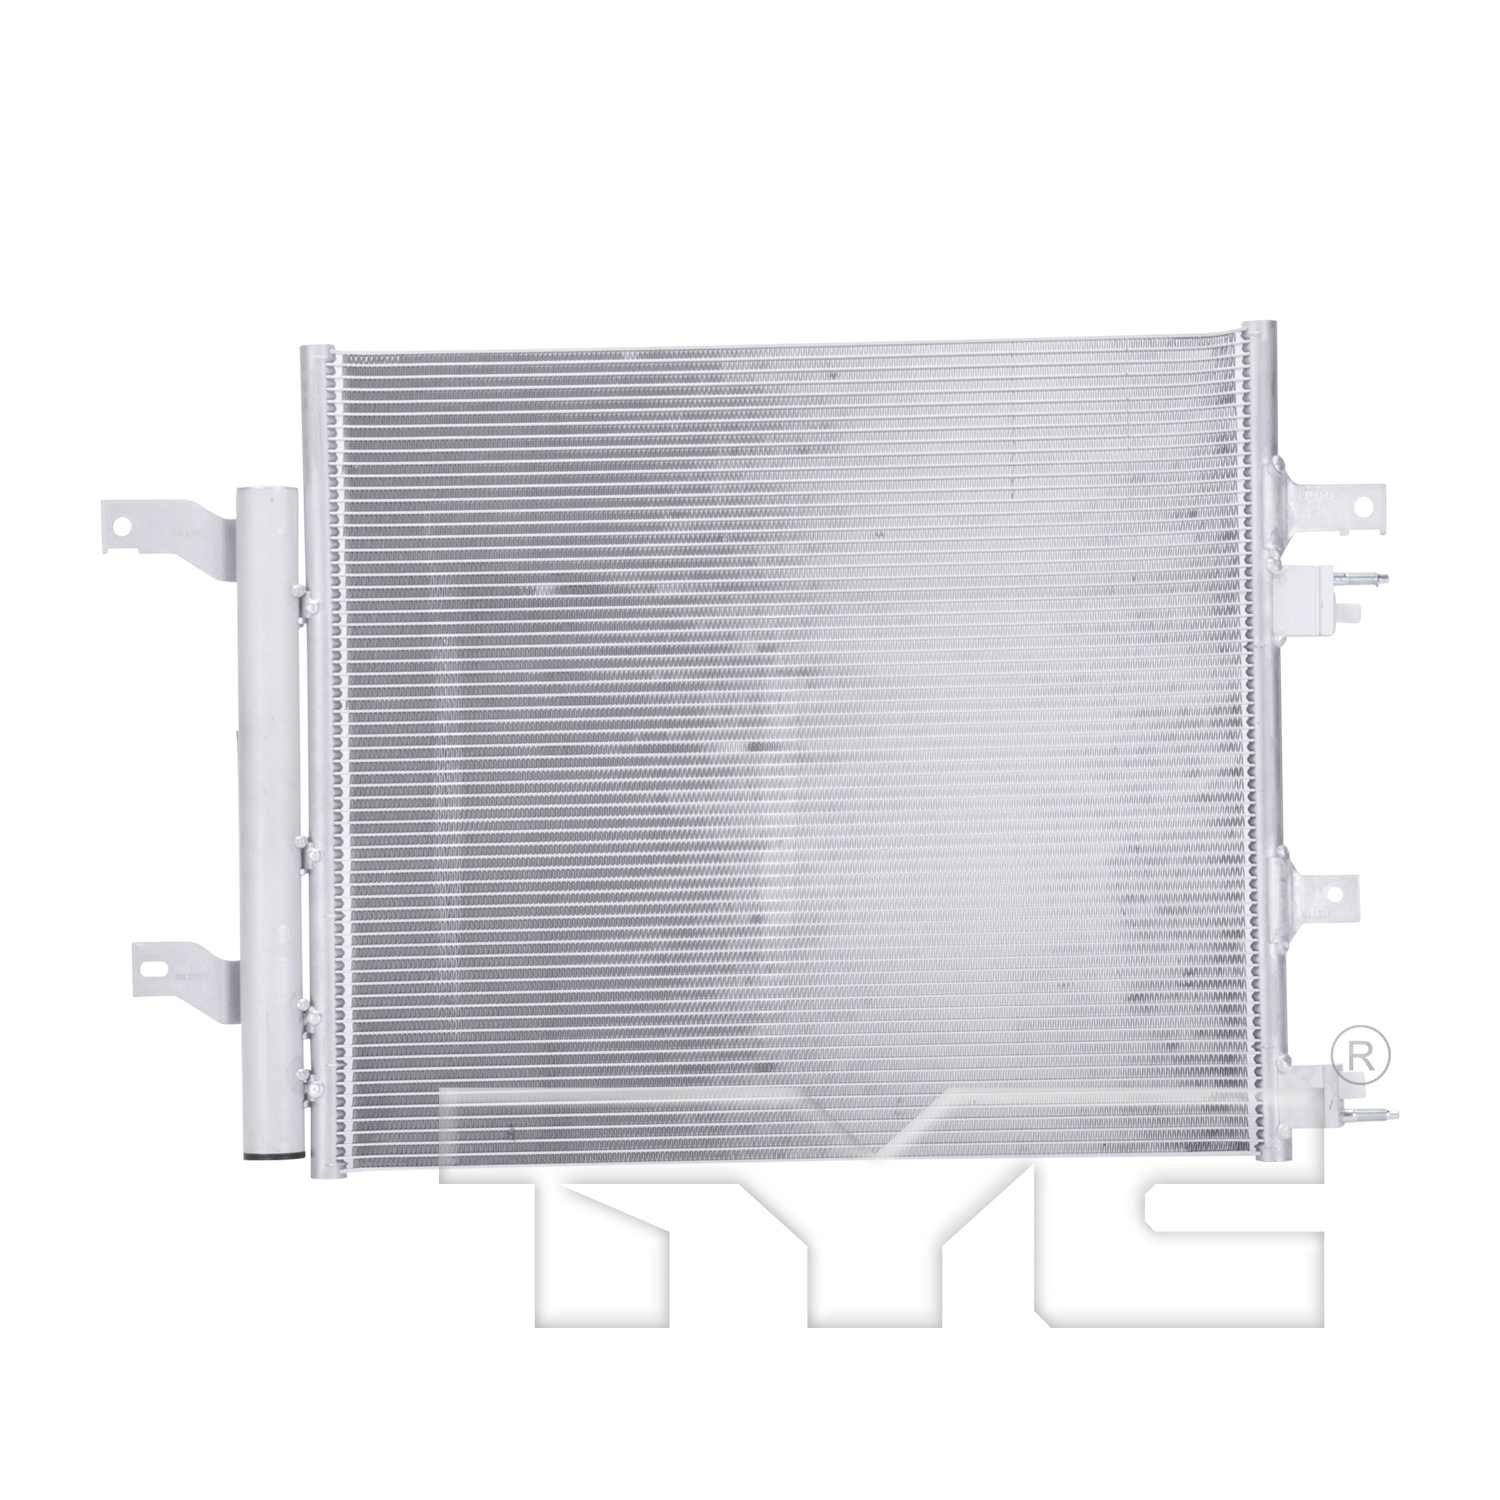 Aftermarket AC CONDENSERS for JAGUAR - XJ, XJ,11-19,Air conditioning condenser